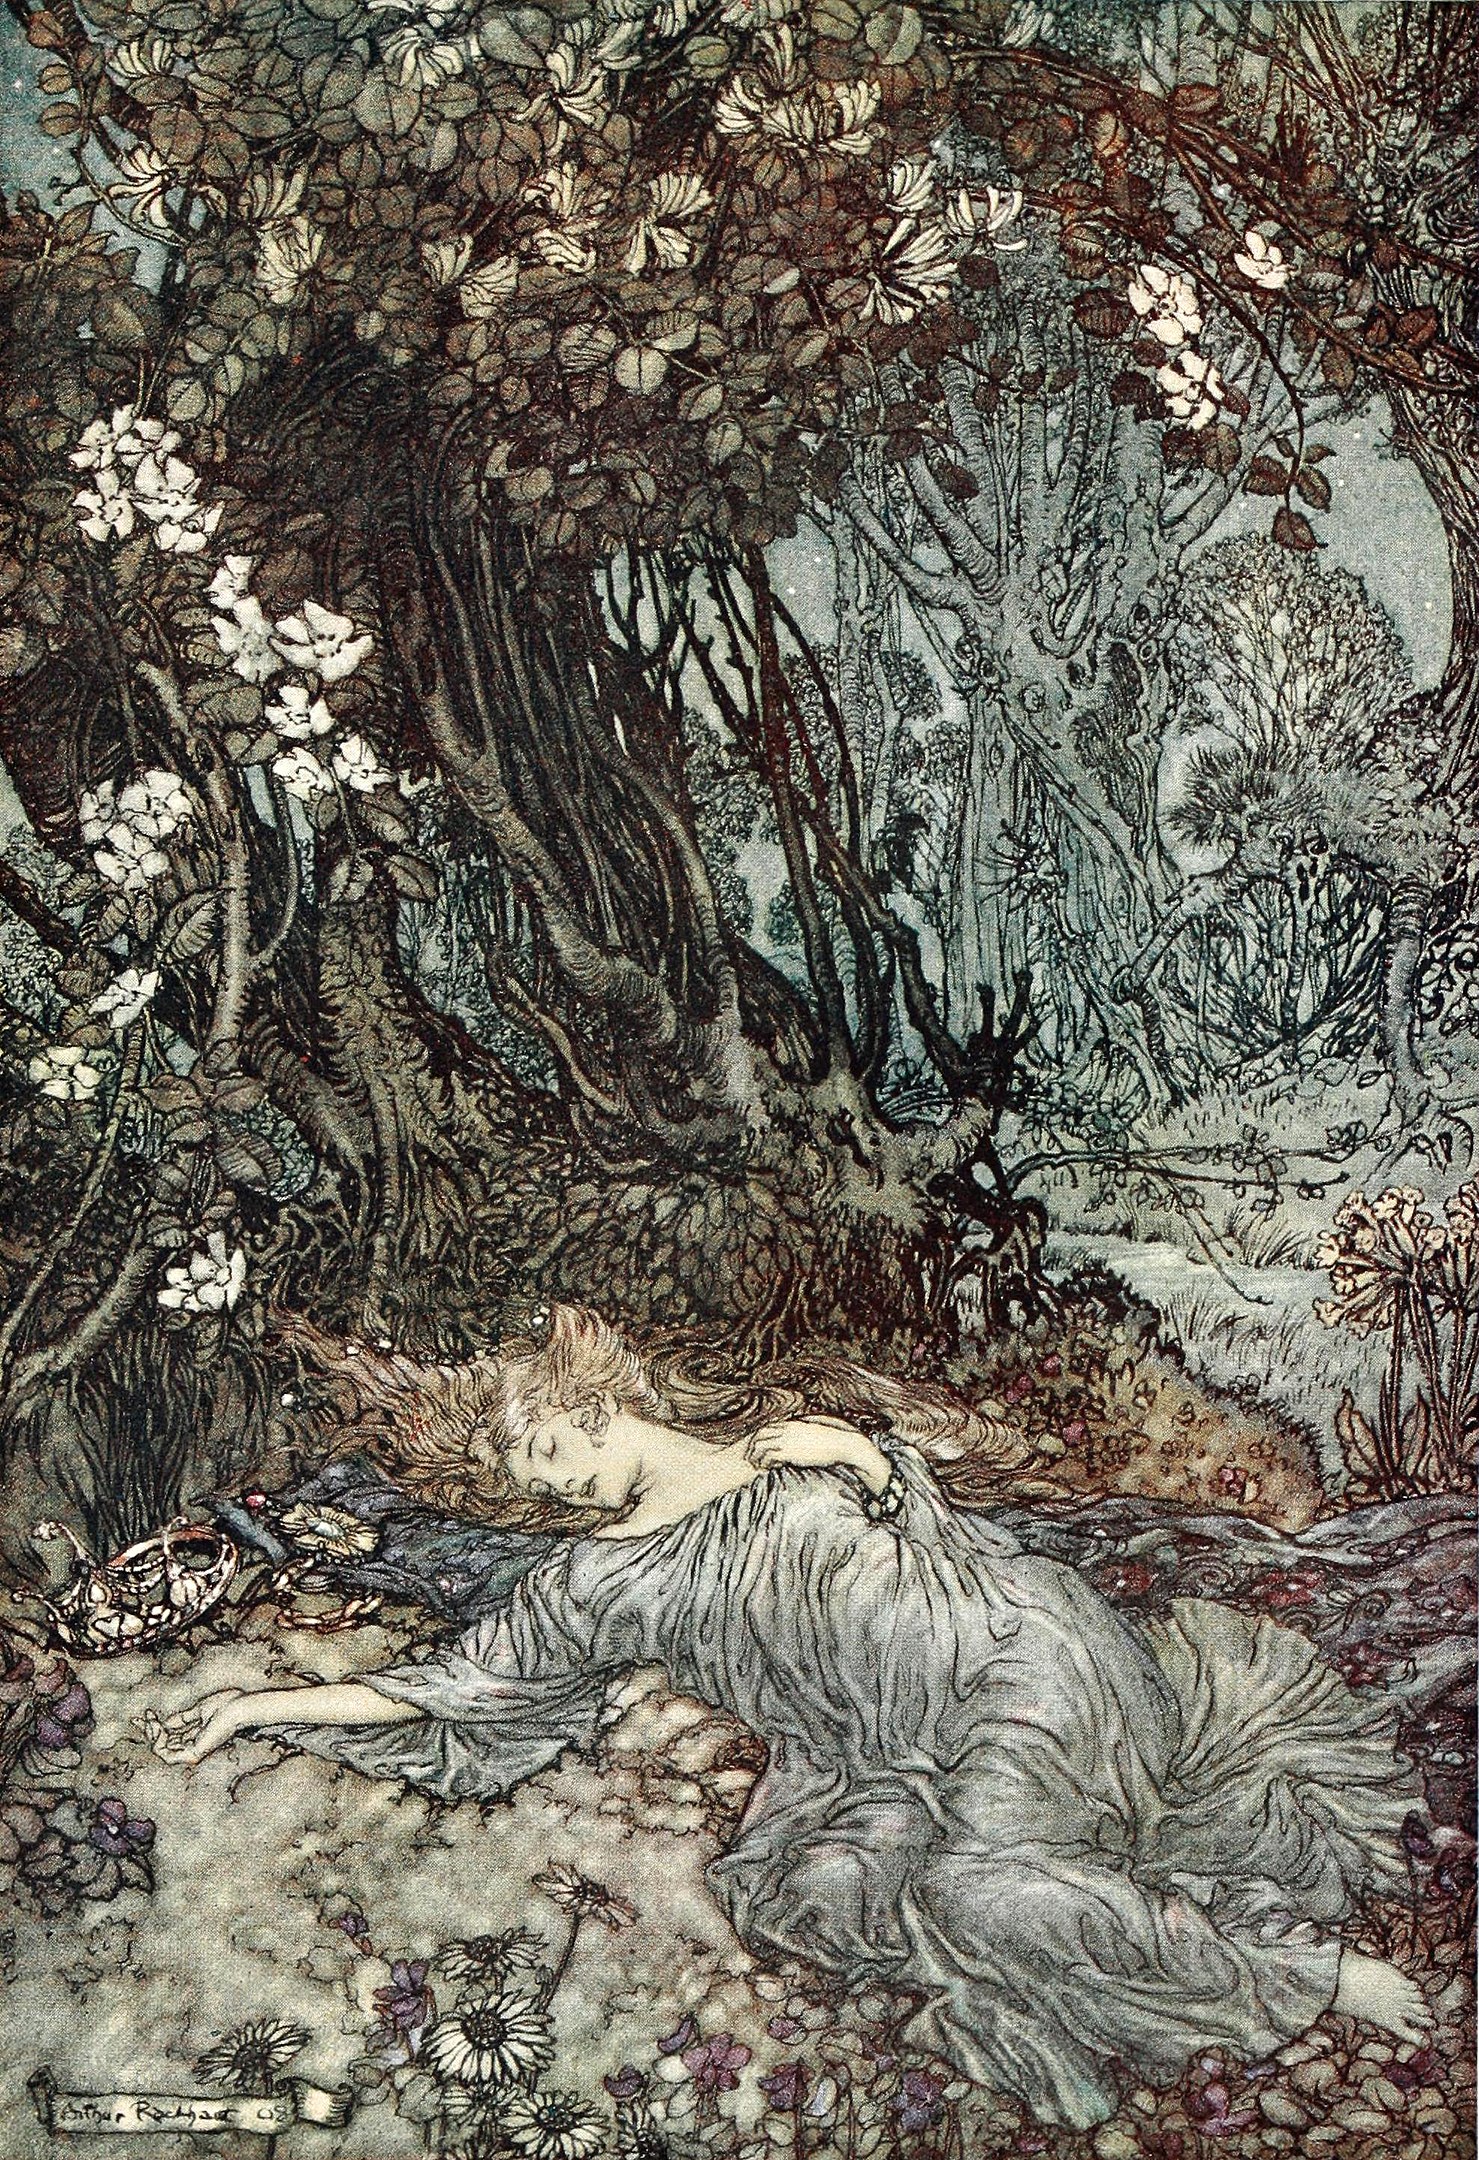 A woman lies asleep on the ground of a forest surrounded by flowers and trees.